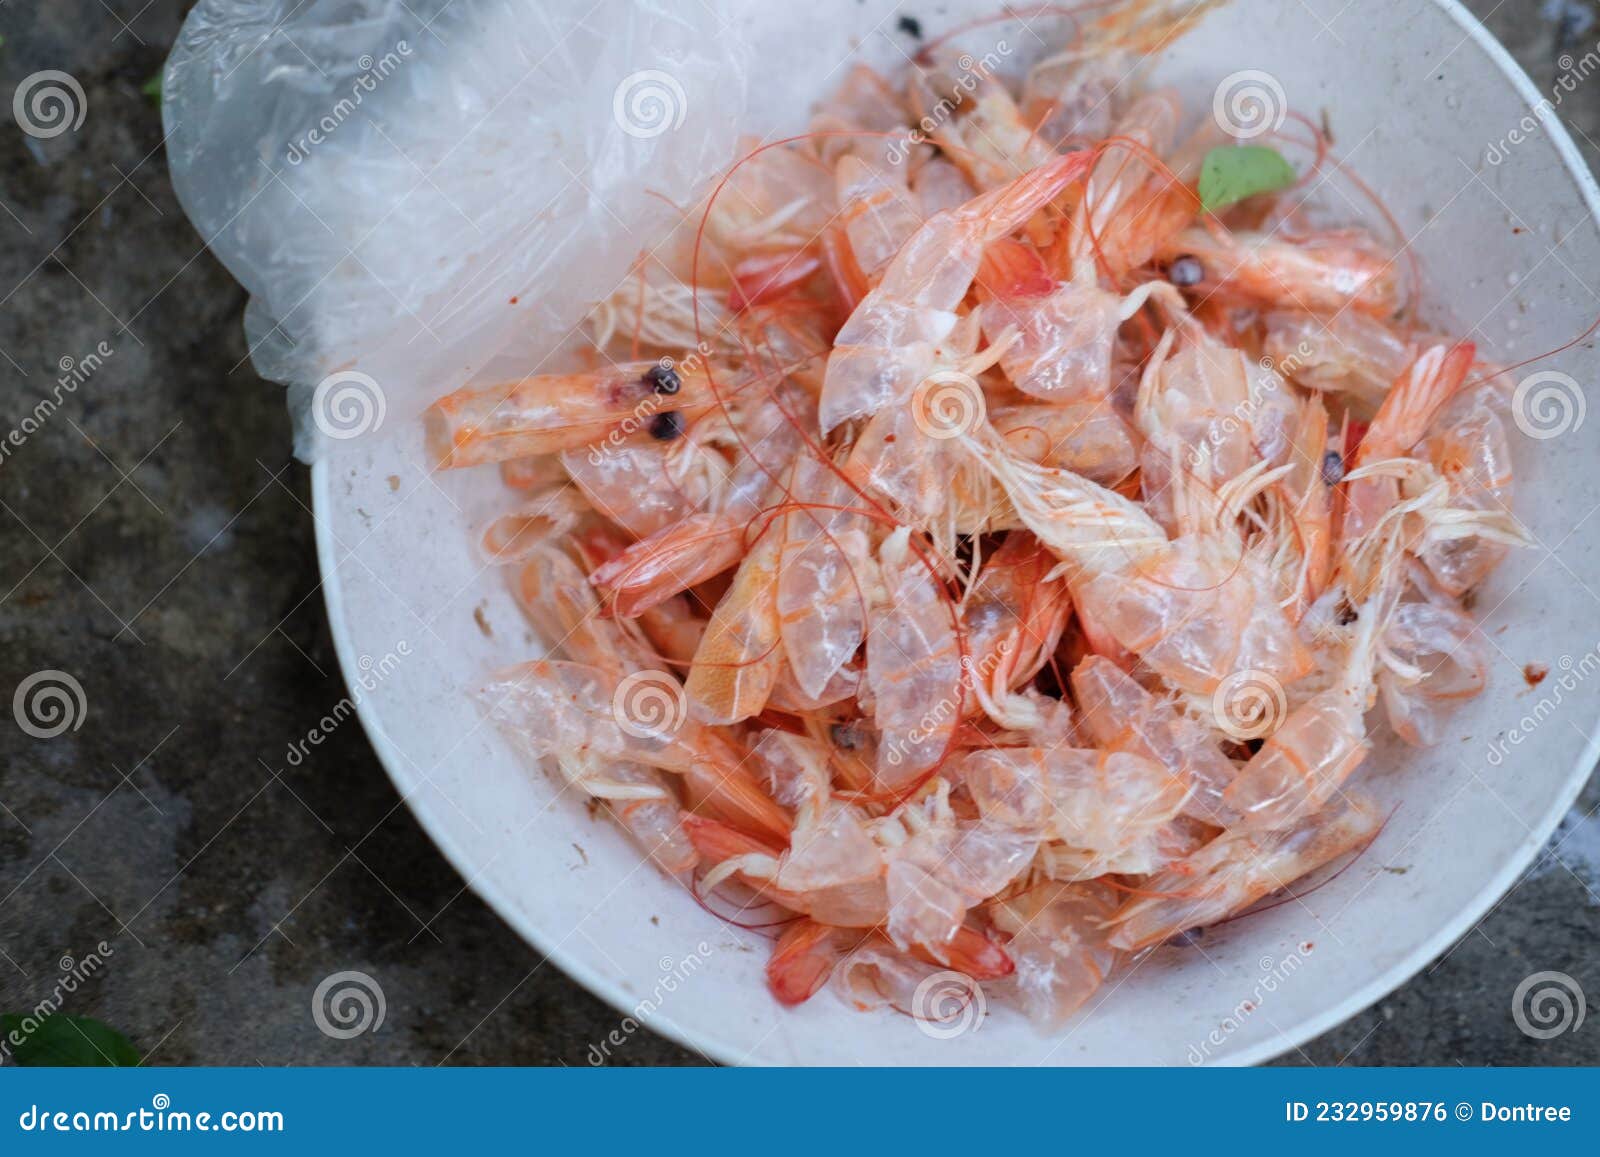 Shrimp Shell and Head Waste after Eating Stock Photo - Image of